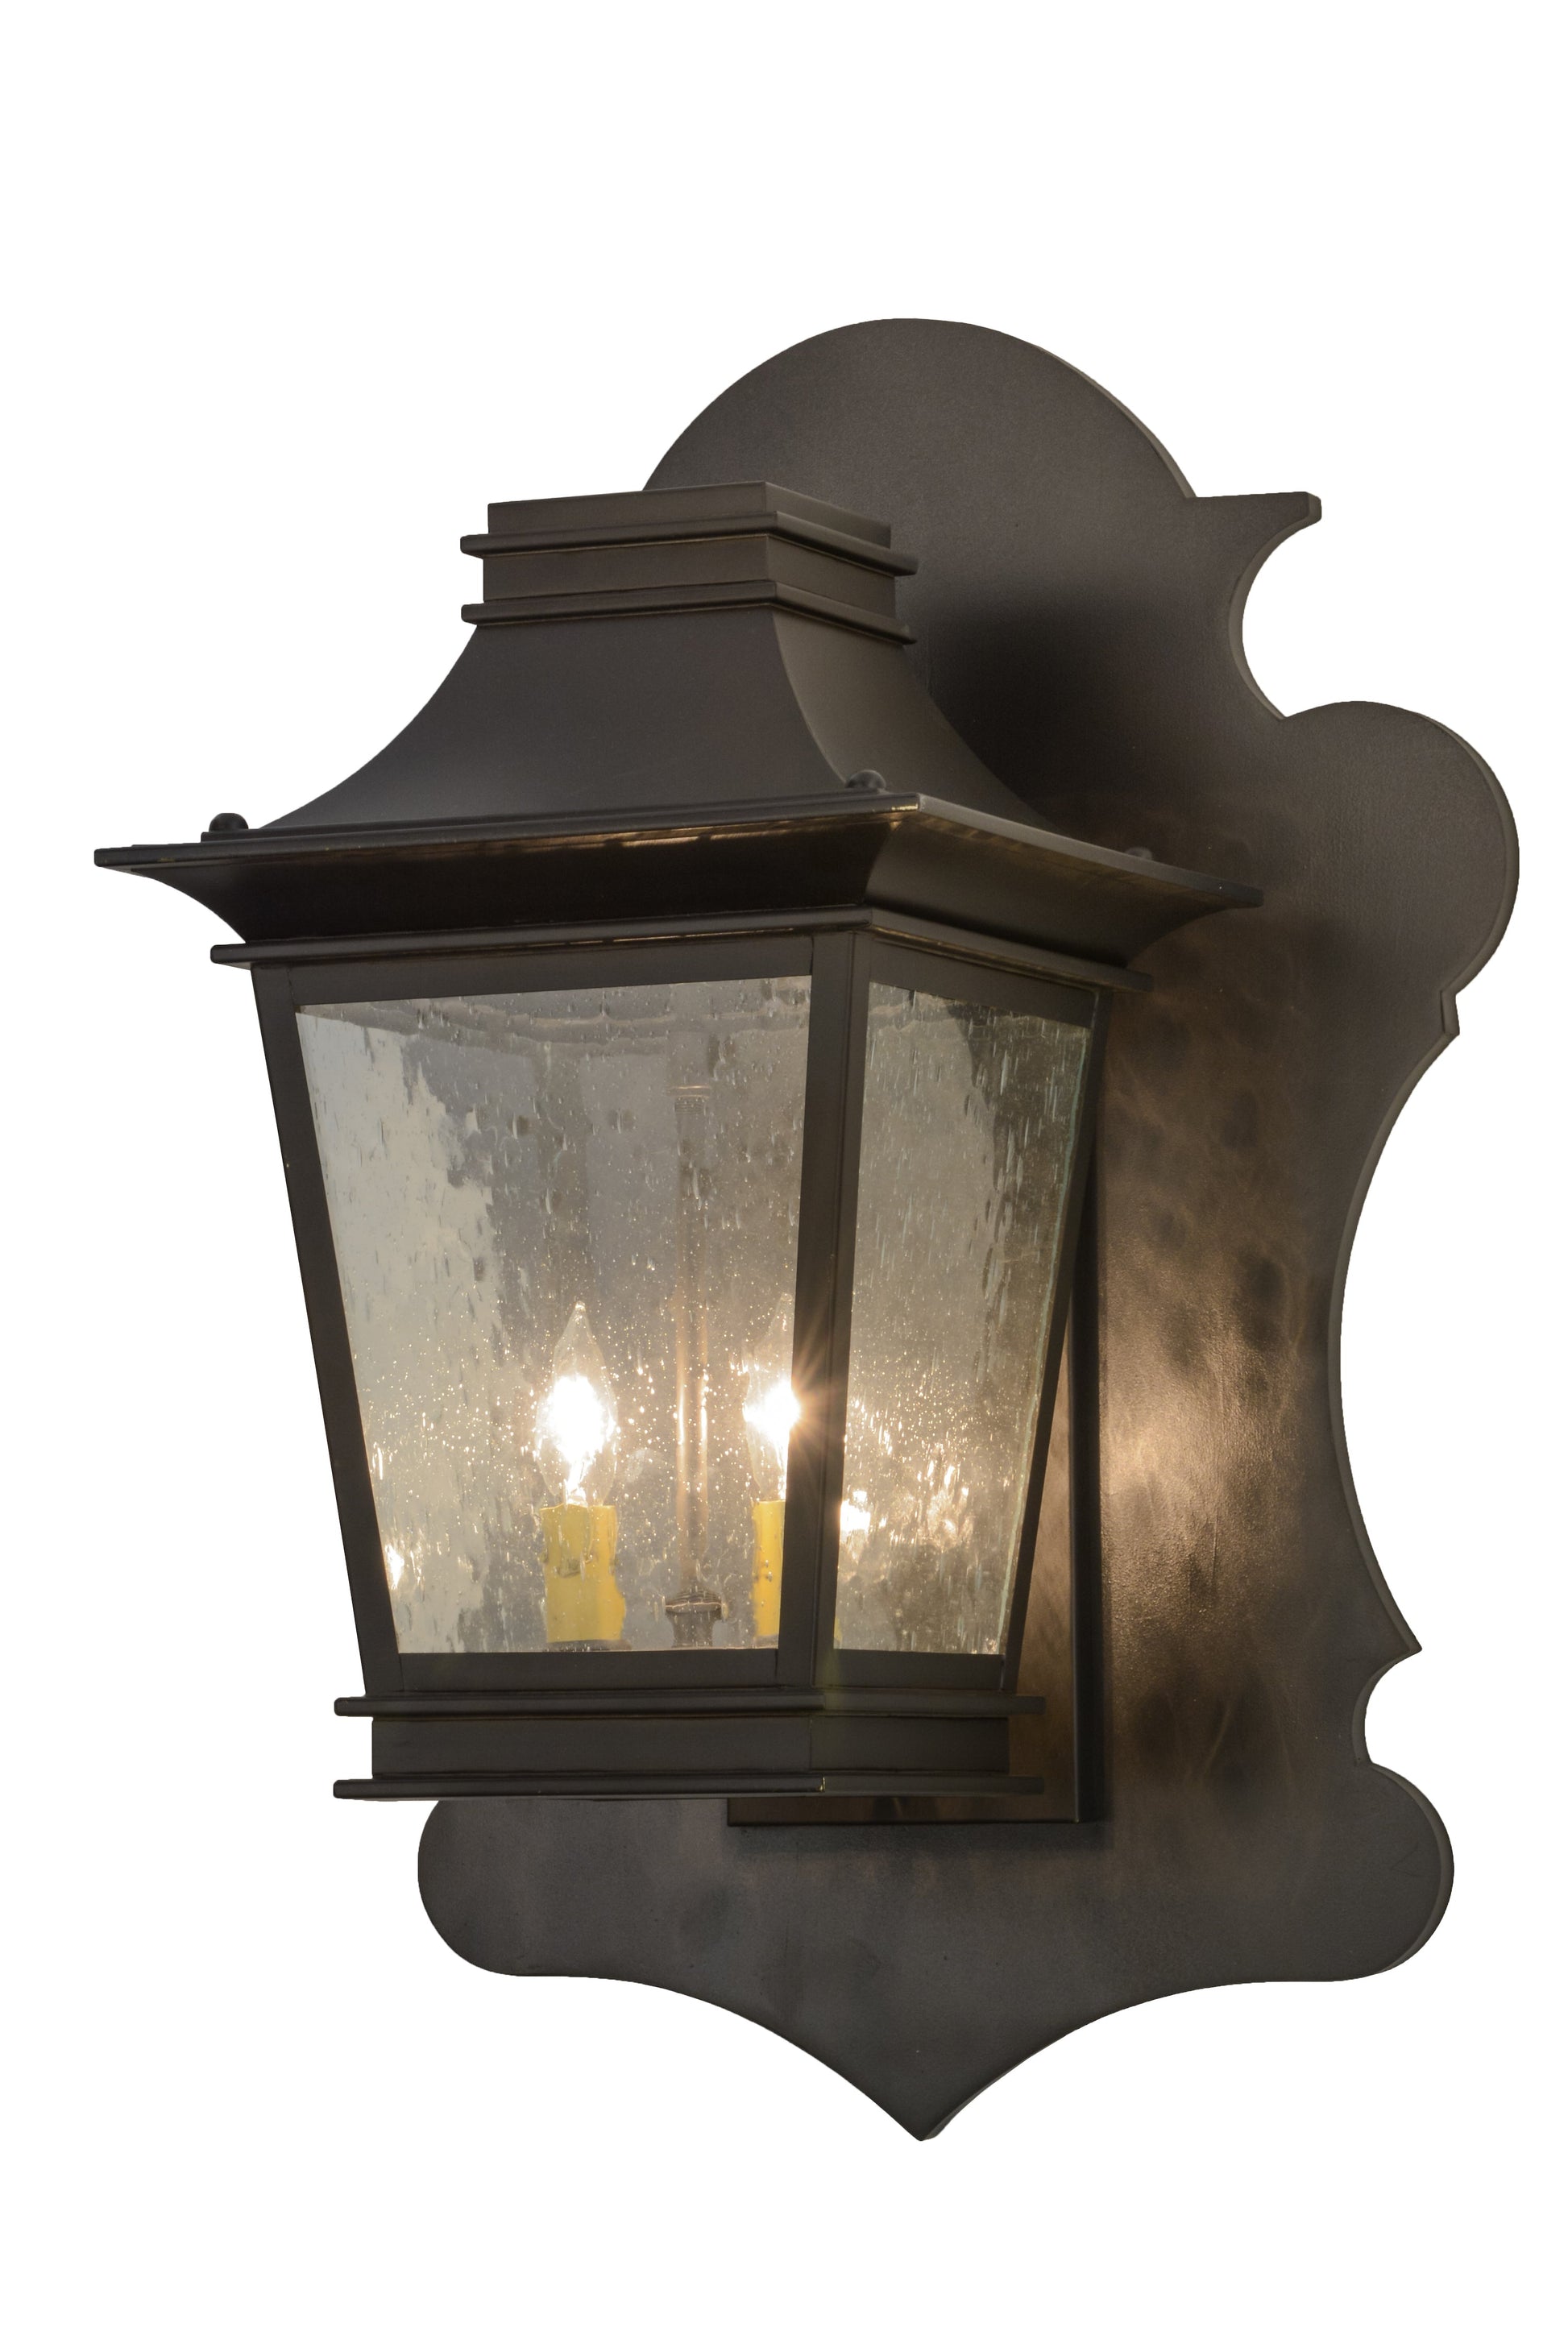 18" Fanucchi Lantern Wall Sconce by 2nd Ave Lighting